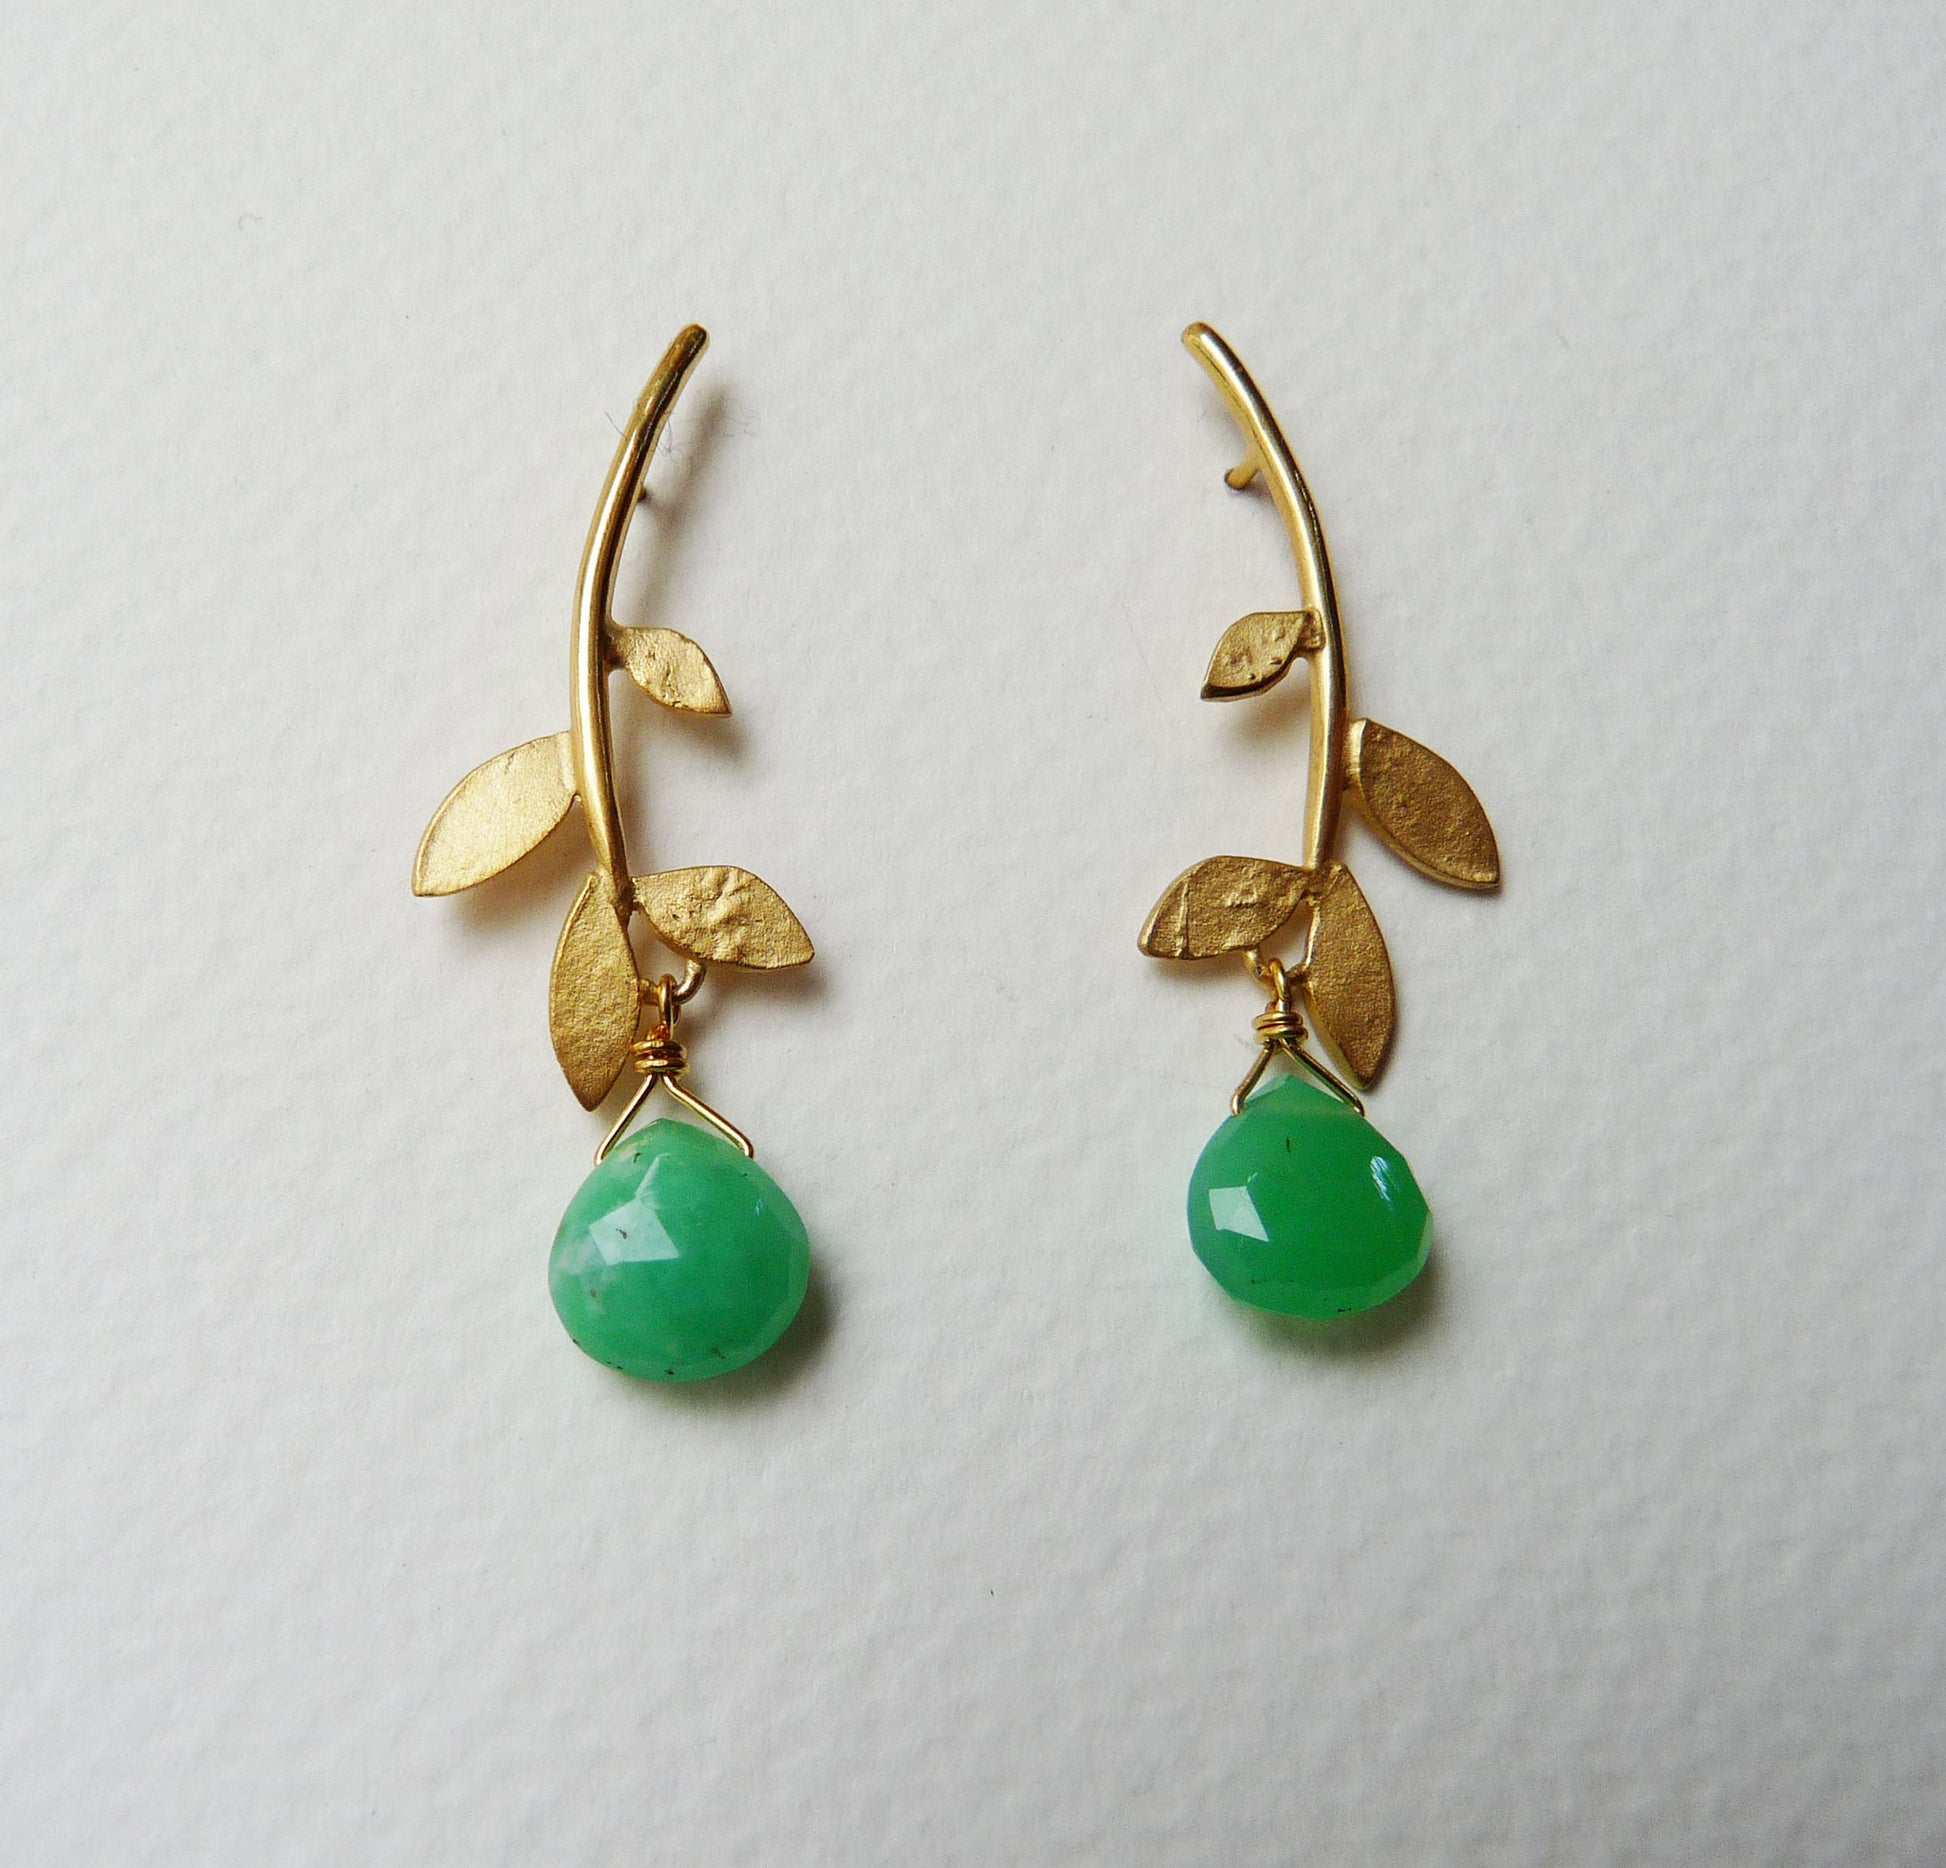 Blossoming, branch, jewellery, jewelry, earrings, studs, sterling, silver, 18ct, gold, nature, natural, amethyst, chrysoprase, labradorite